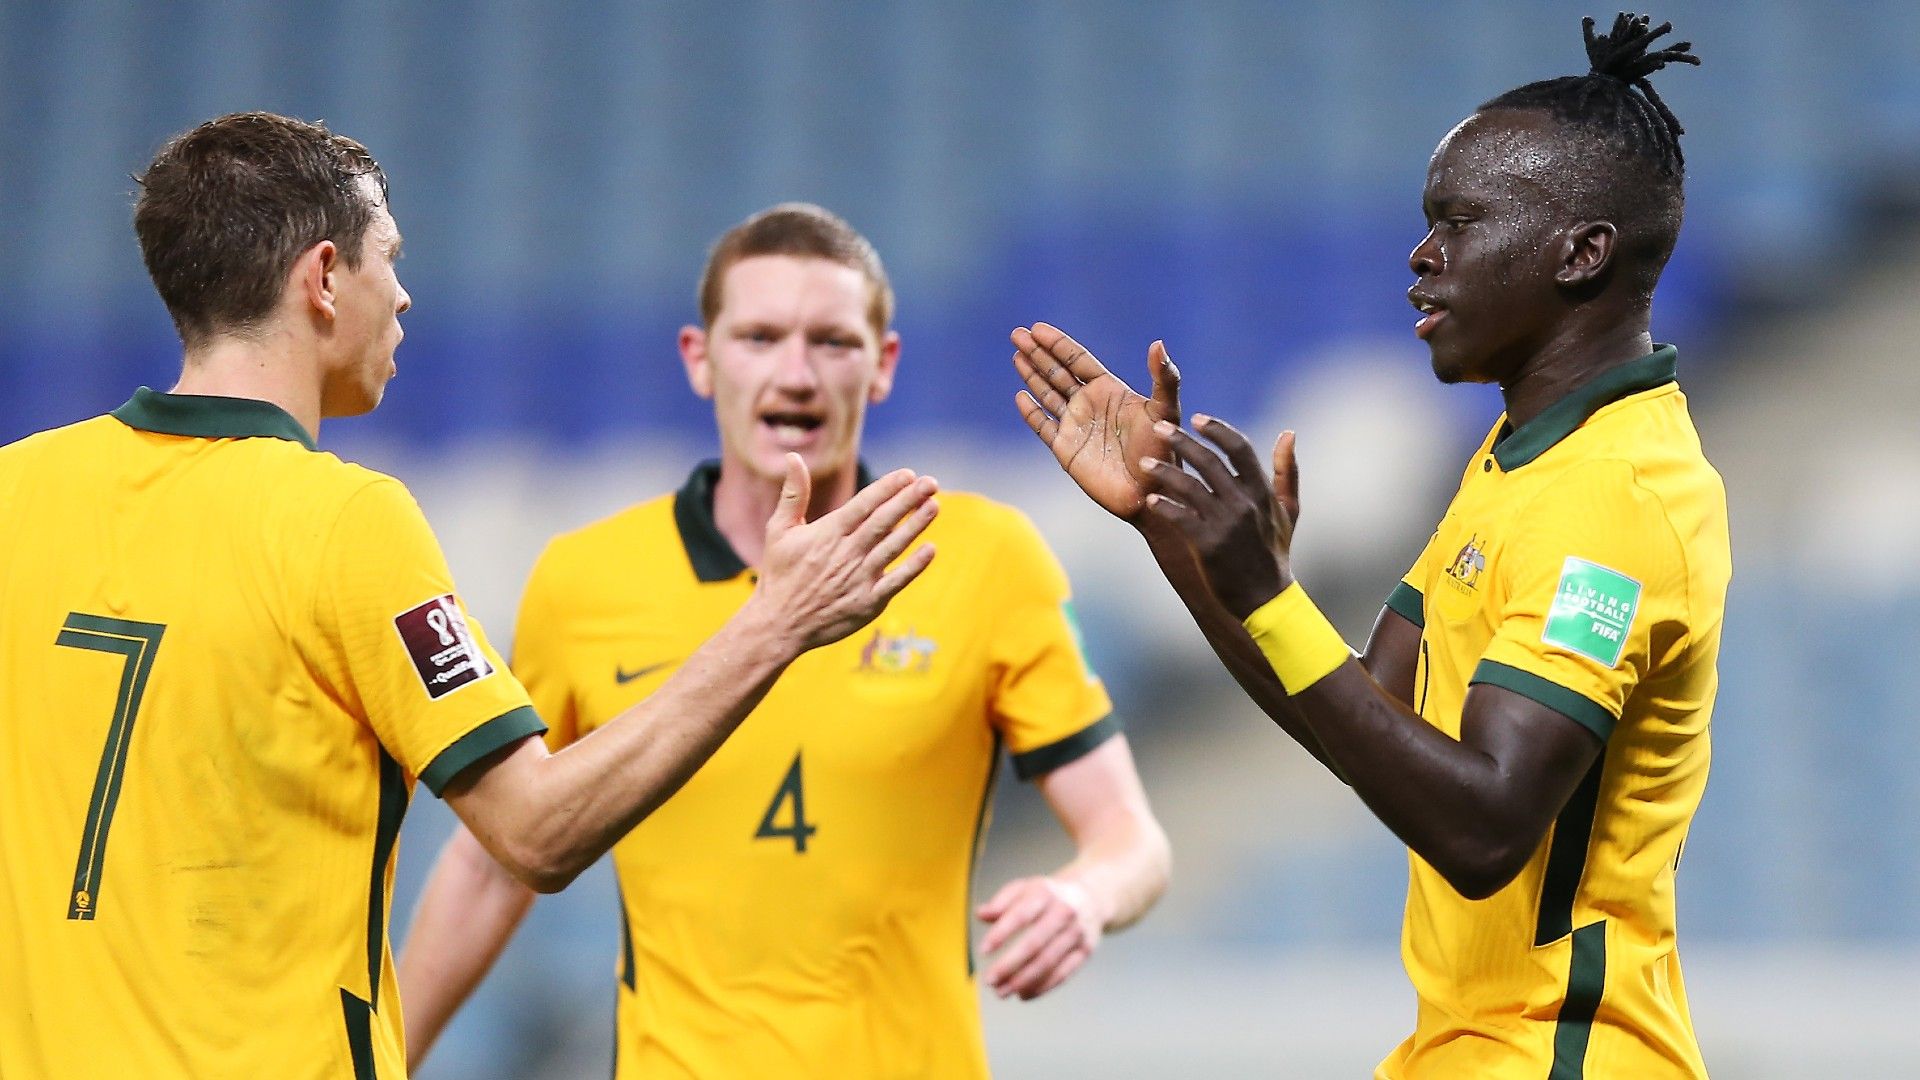 Australia come from behind to win friendly against Jordan ahead of must-win World Cup play-offs